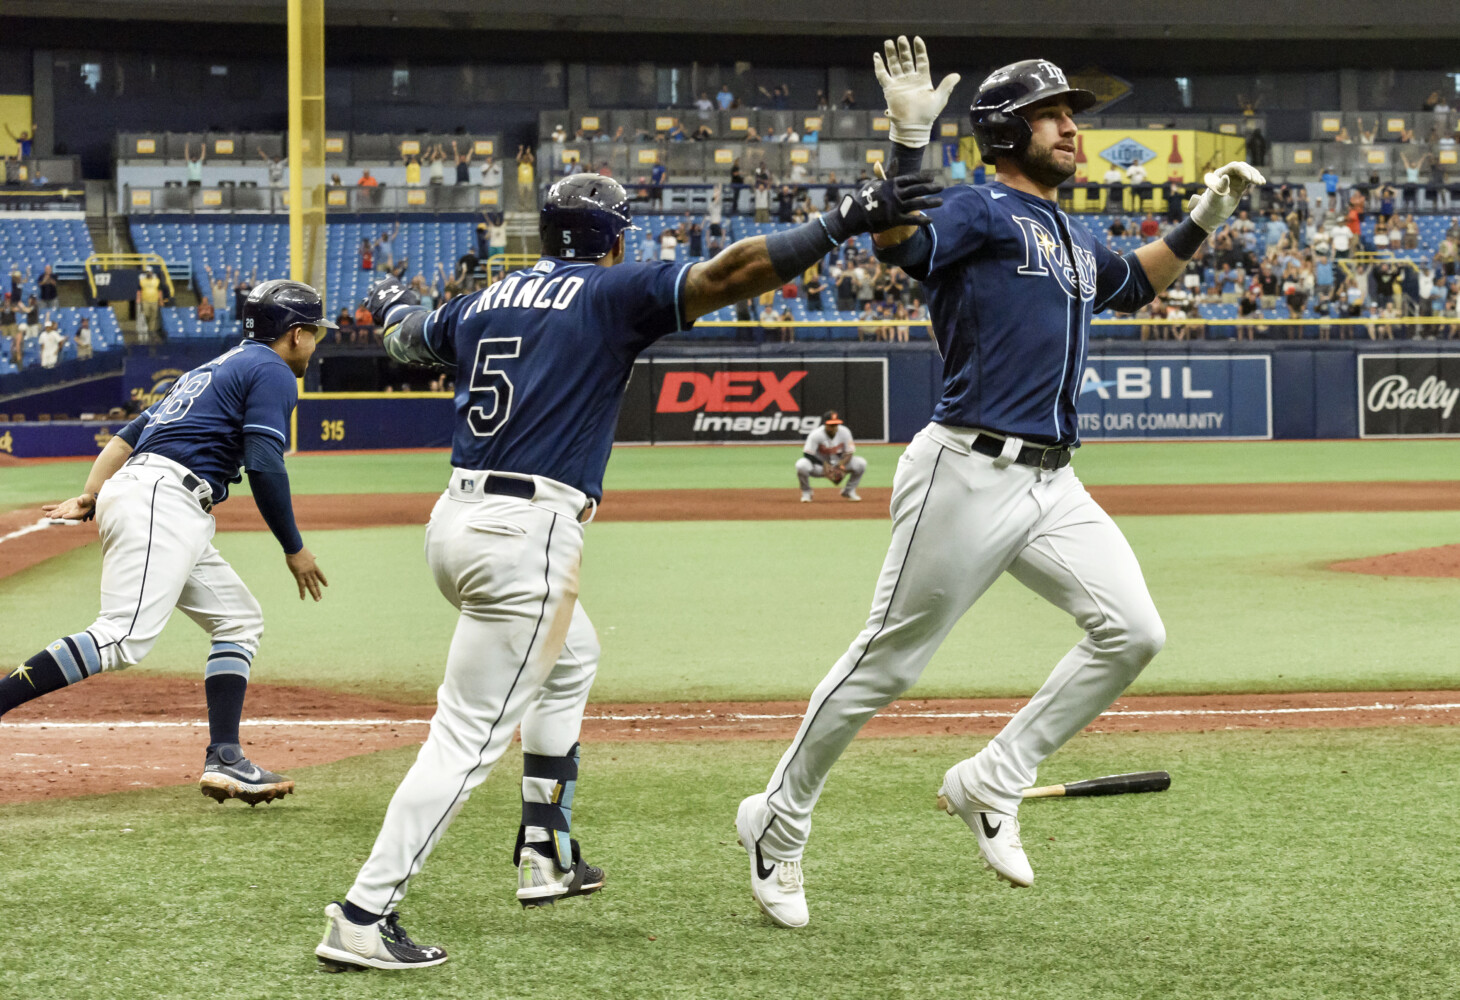 Rays score five in 7th, beat Boston 5-4 for four-game sweep